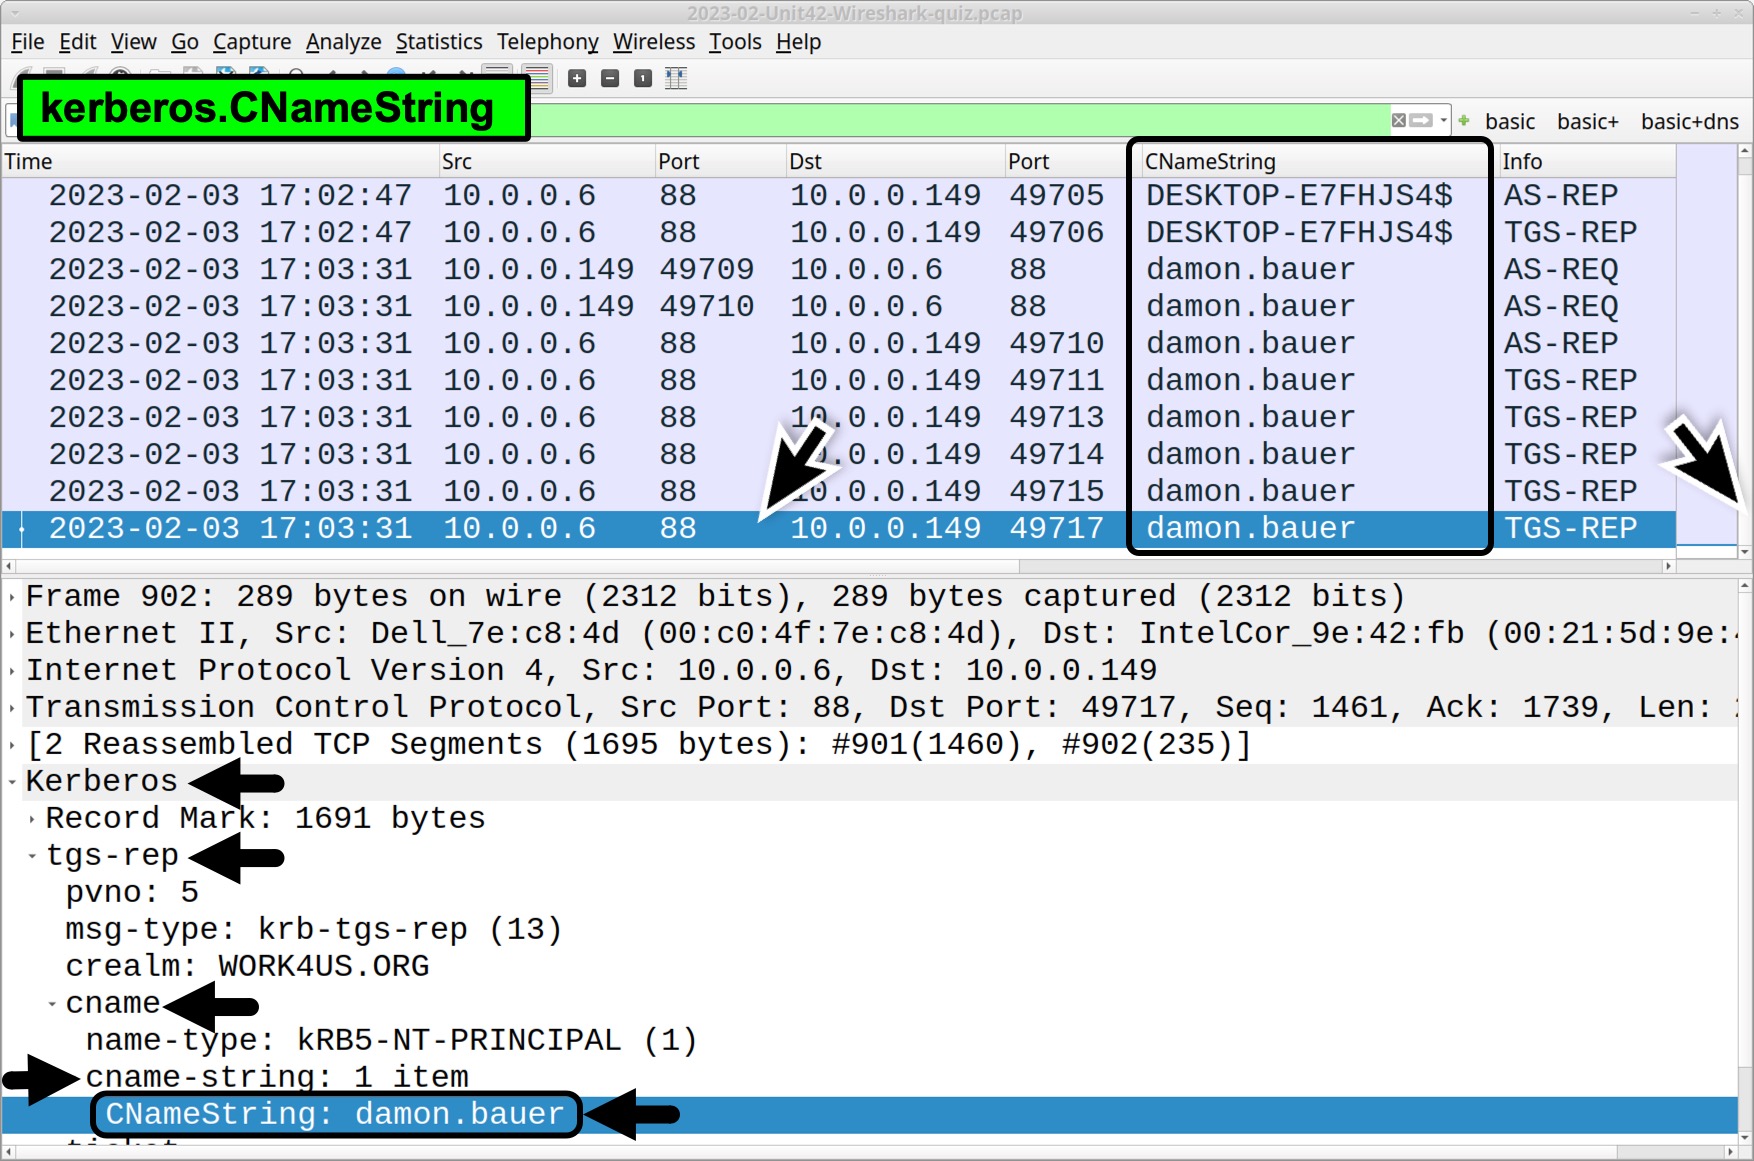 Image 3 is a screenshot of Wireshark highlighting the CNameString column, showing how to find the victim’s Window user account name in the Kerberos traffic.